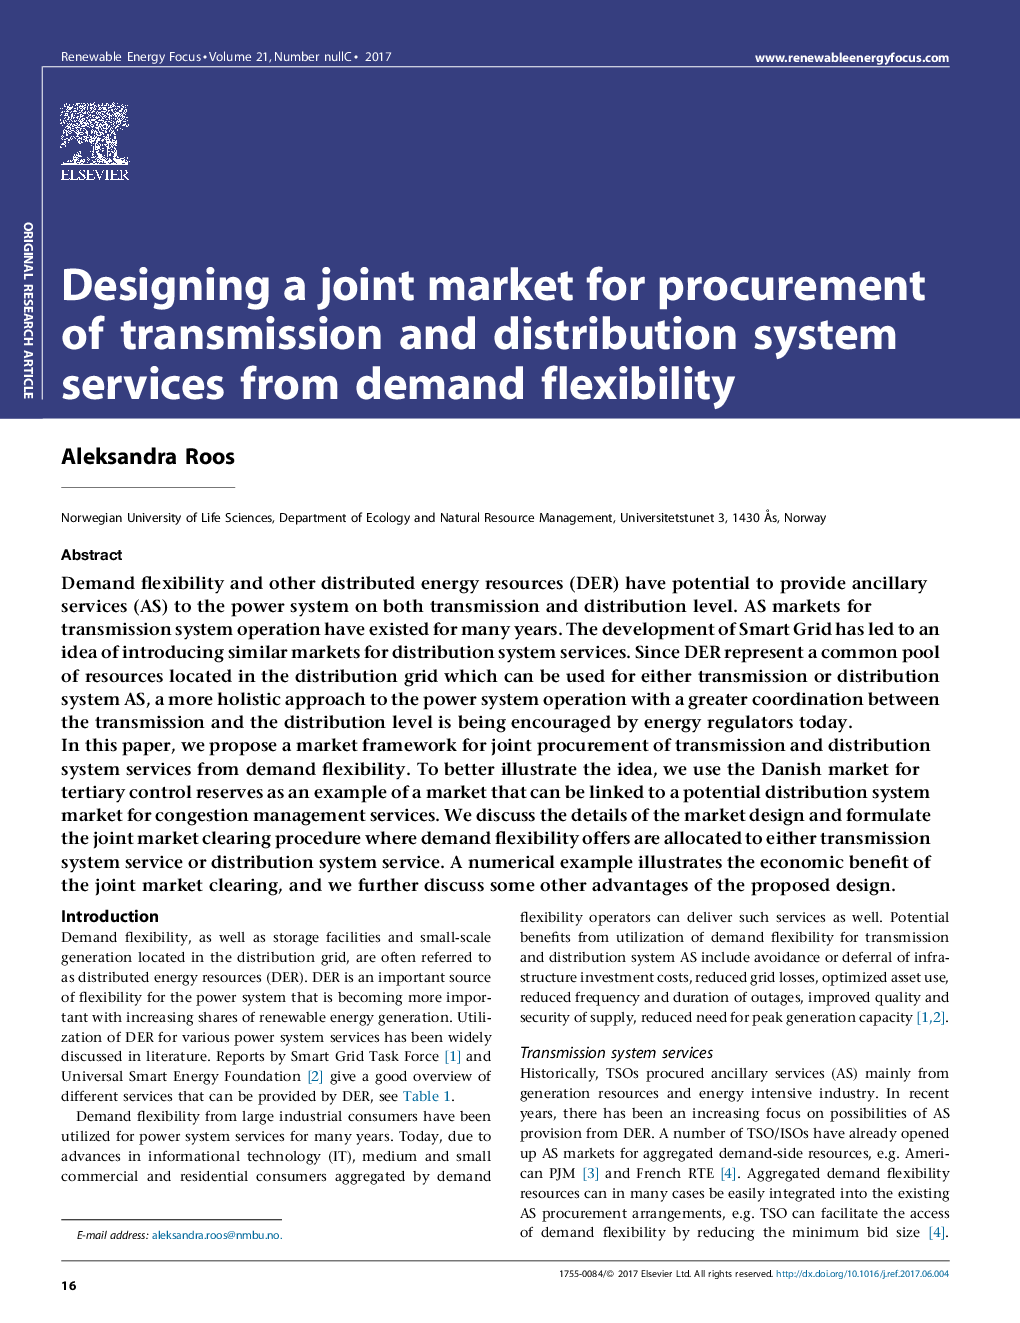 Designing a joint market for procurement of transmission and distribution system services from demand flexibility